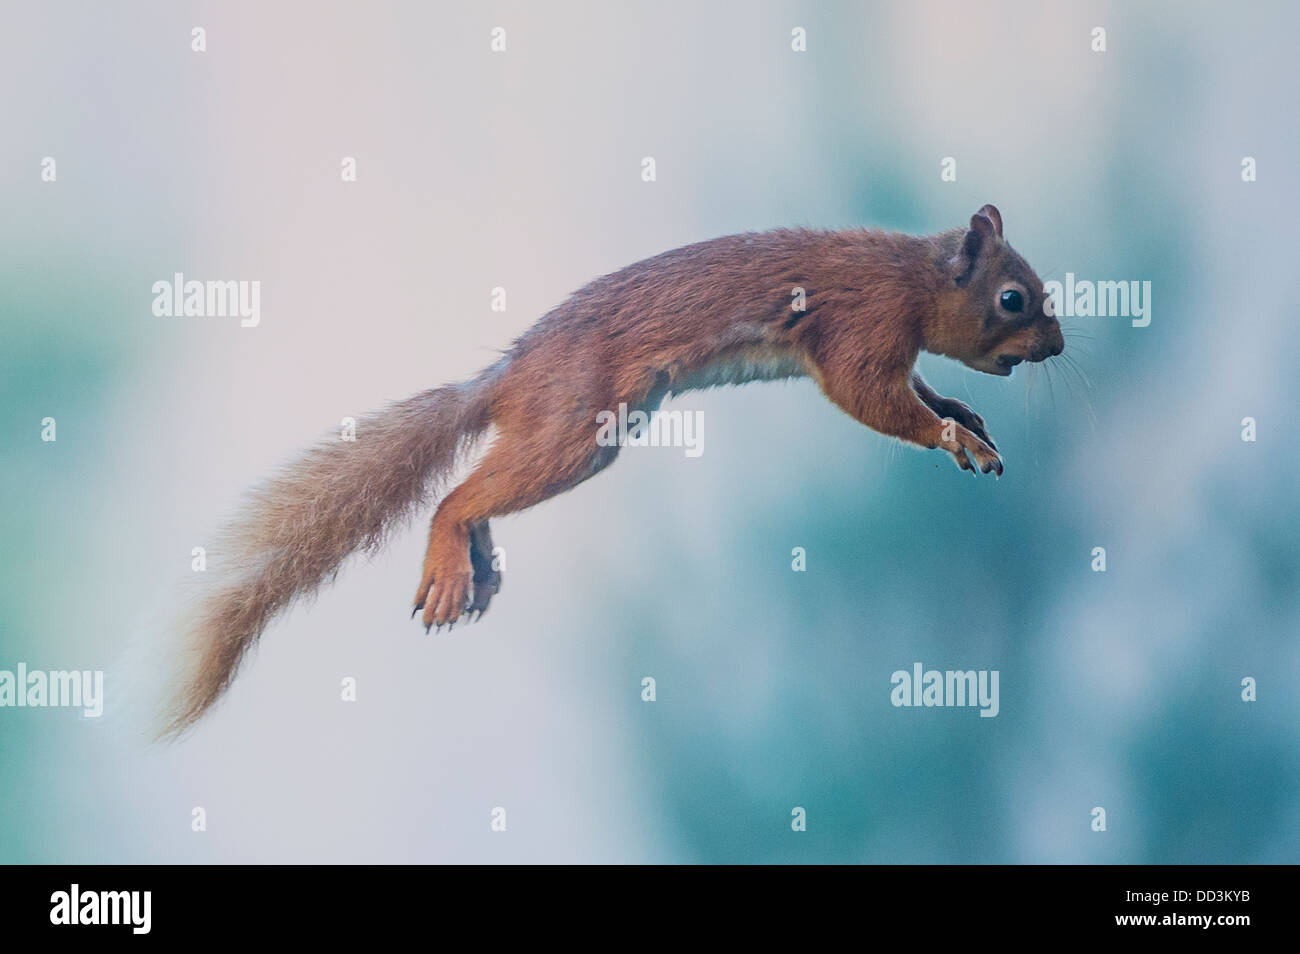 A Red Squirrel jumping between branches Stock Photo